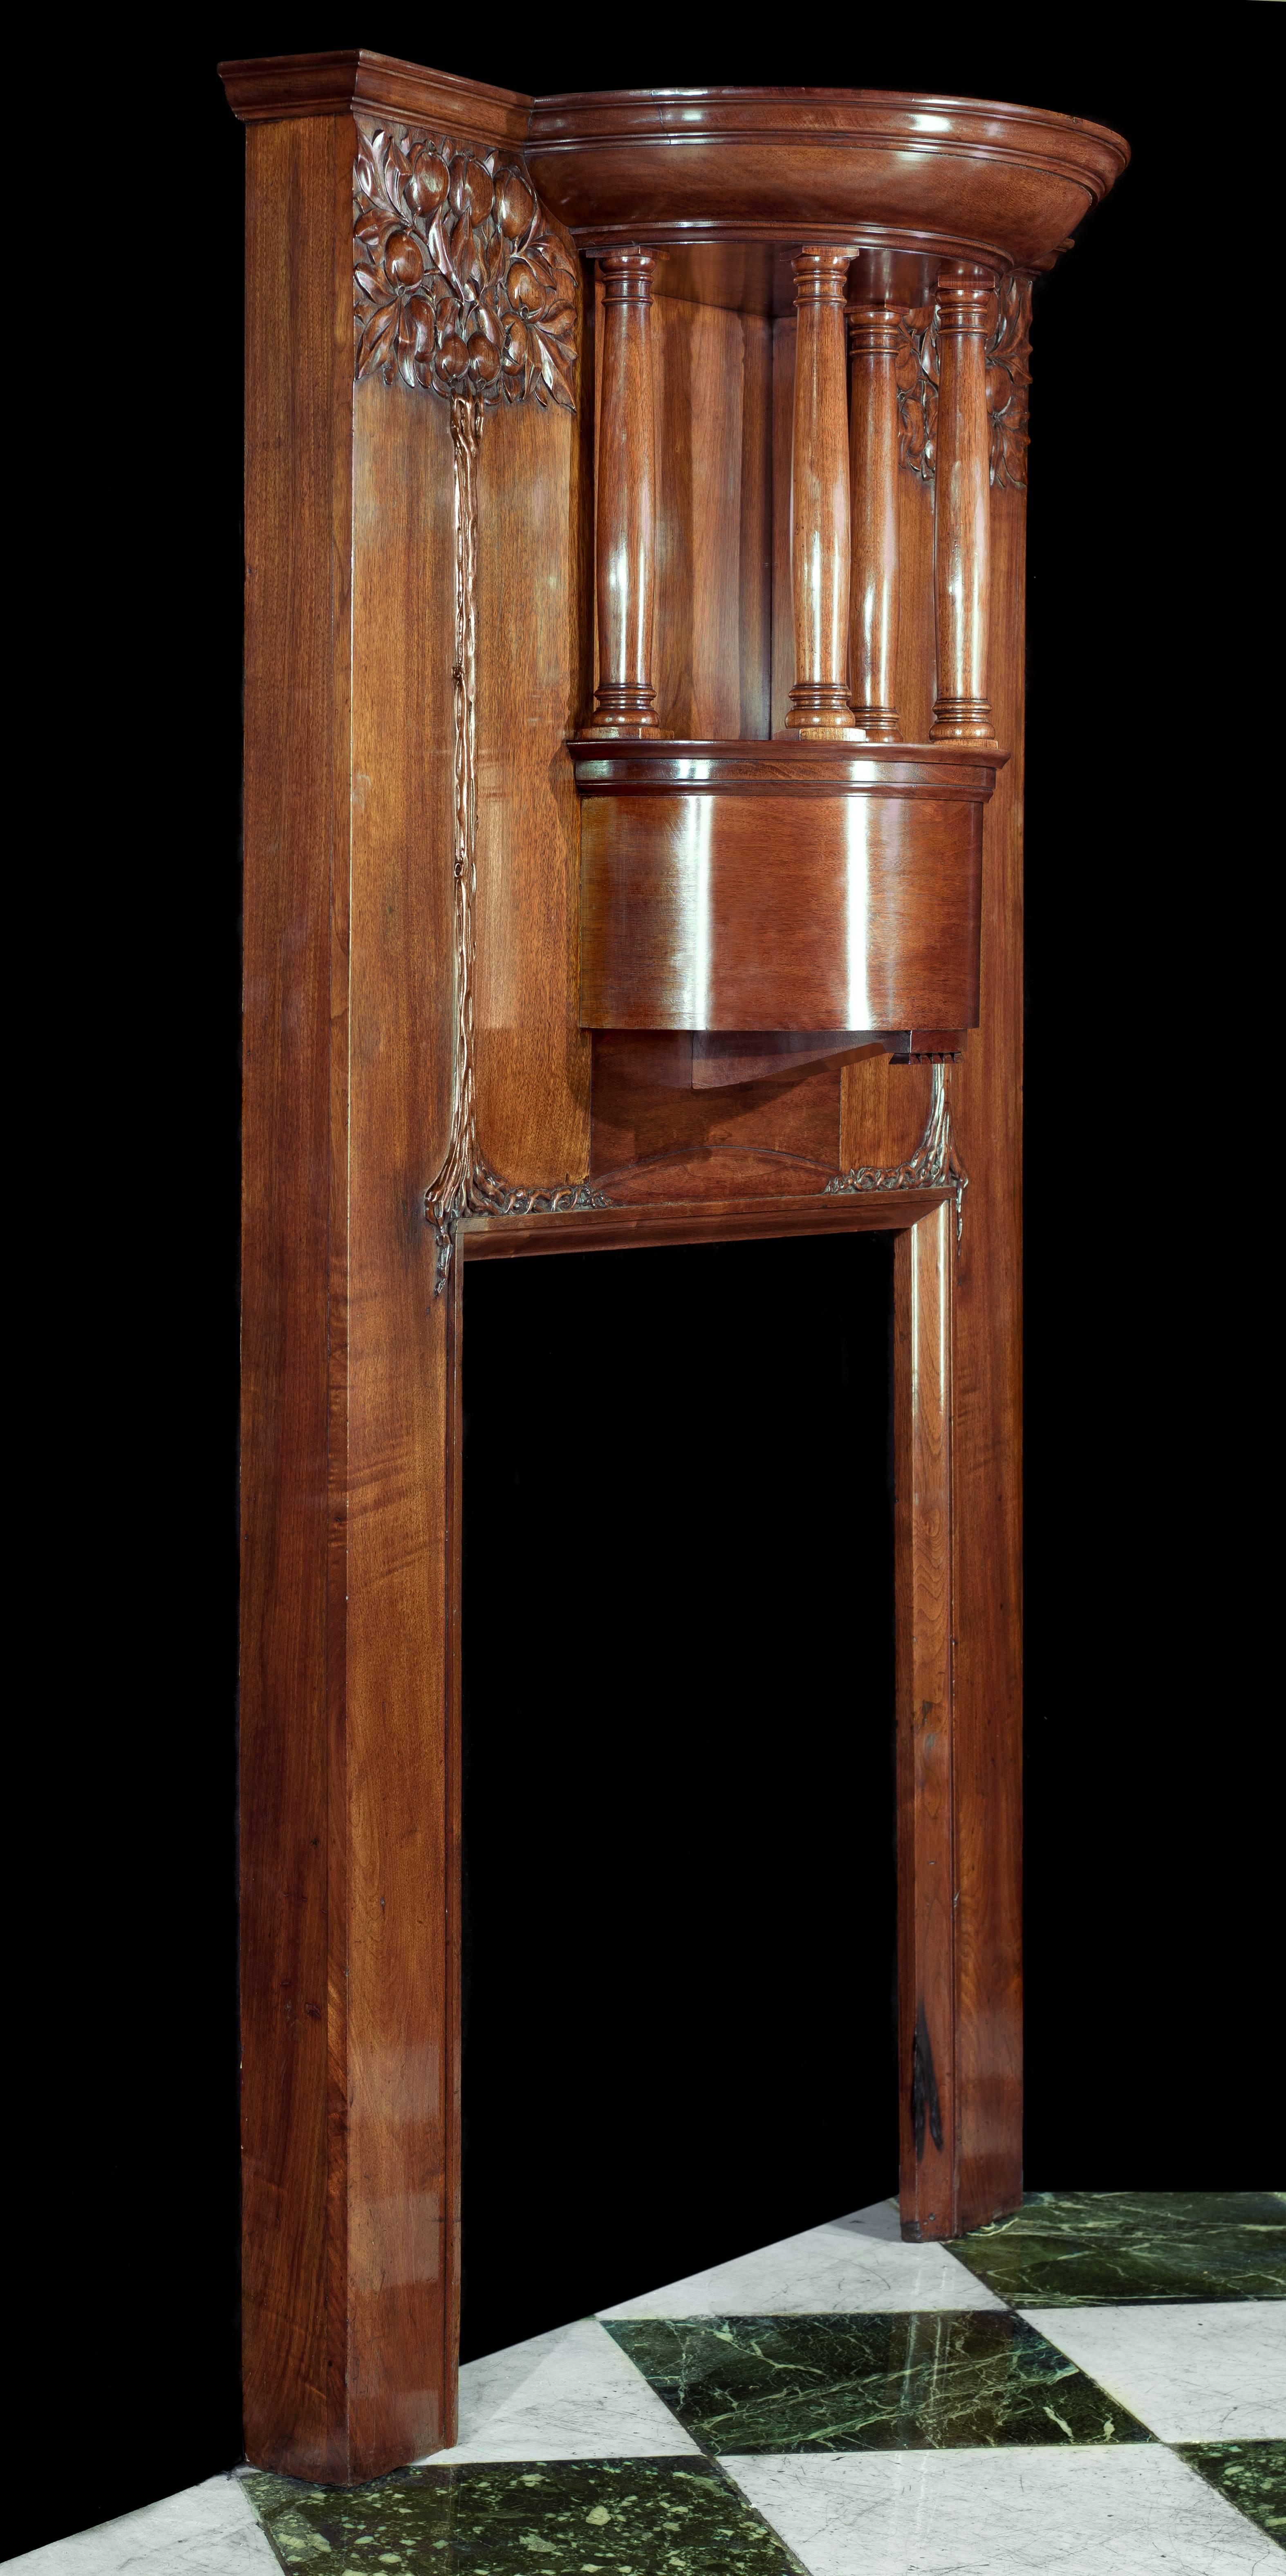 A tall and elegant walnut antique Art Nouveau fireplace in the manner of Charles Harrison Townsend (1851-1928), architect and designer of the 1901 Horniman Museum and the 1895 Bishopsgate Institute, both in London. Carved in relief in a design